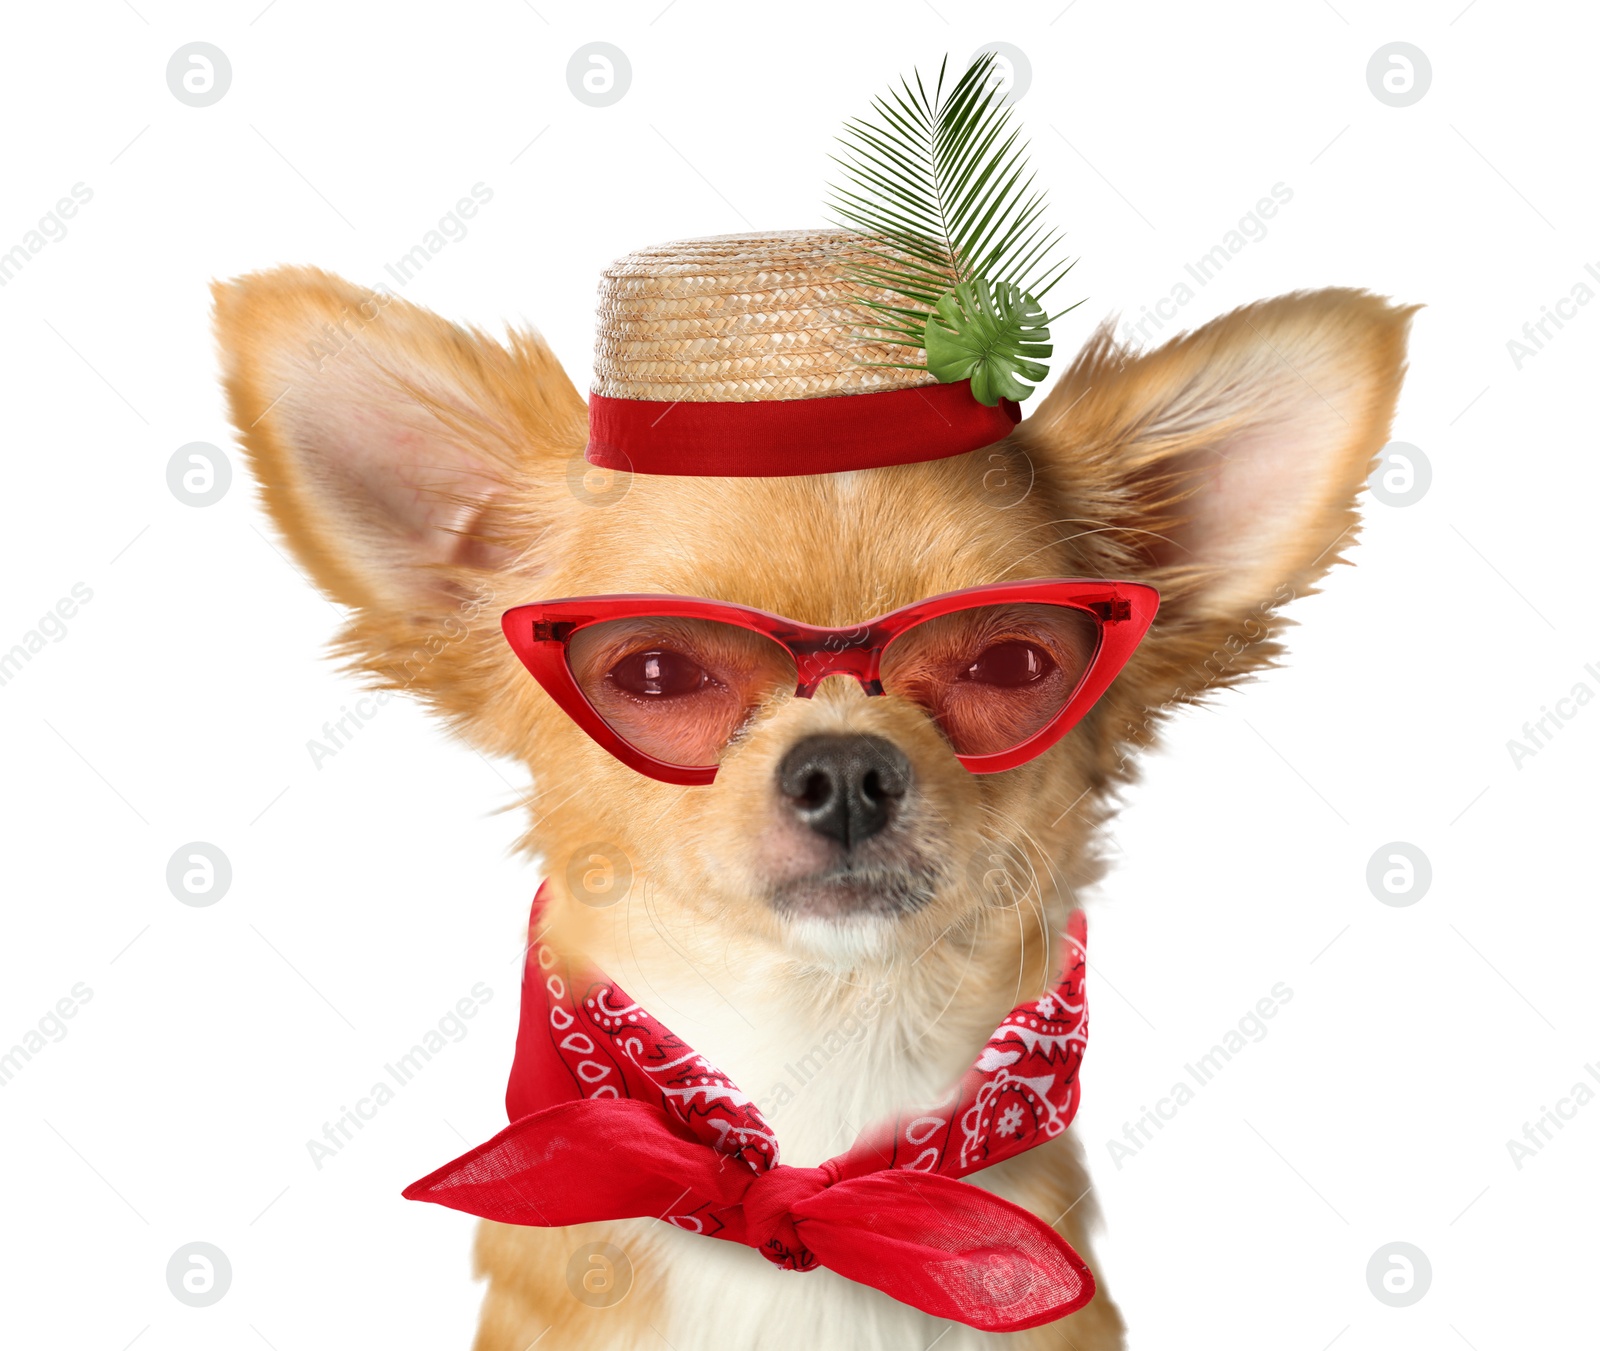 Image of Cute dog in hat, sunglasses and tied bandana on white background. Summer party